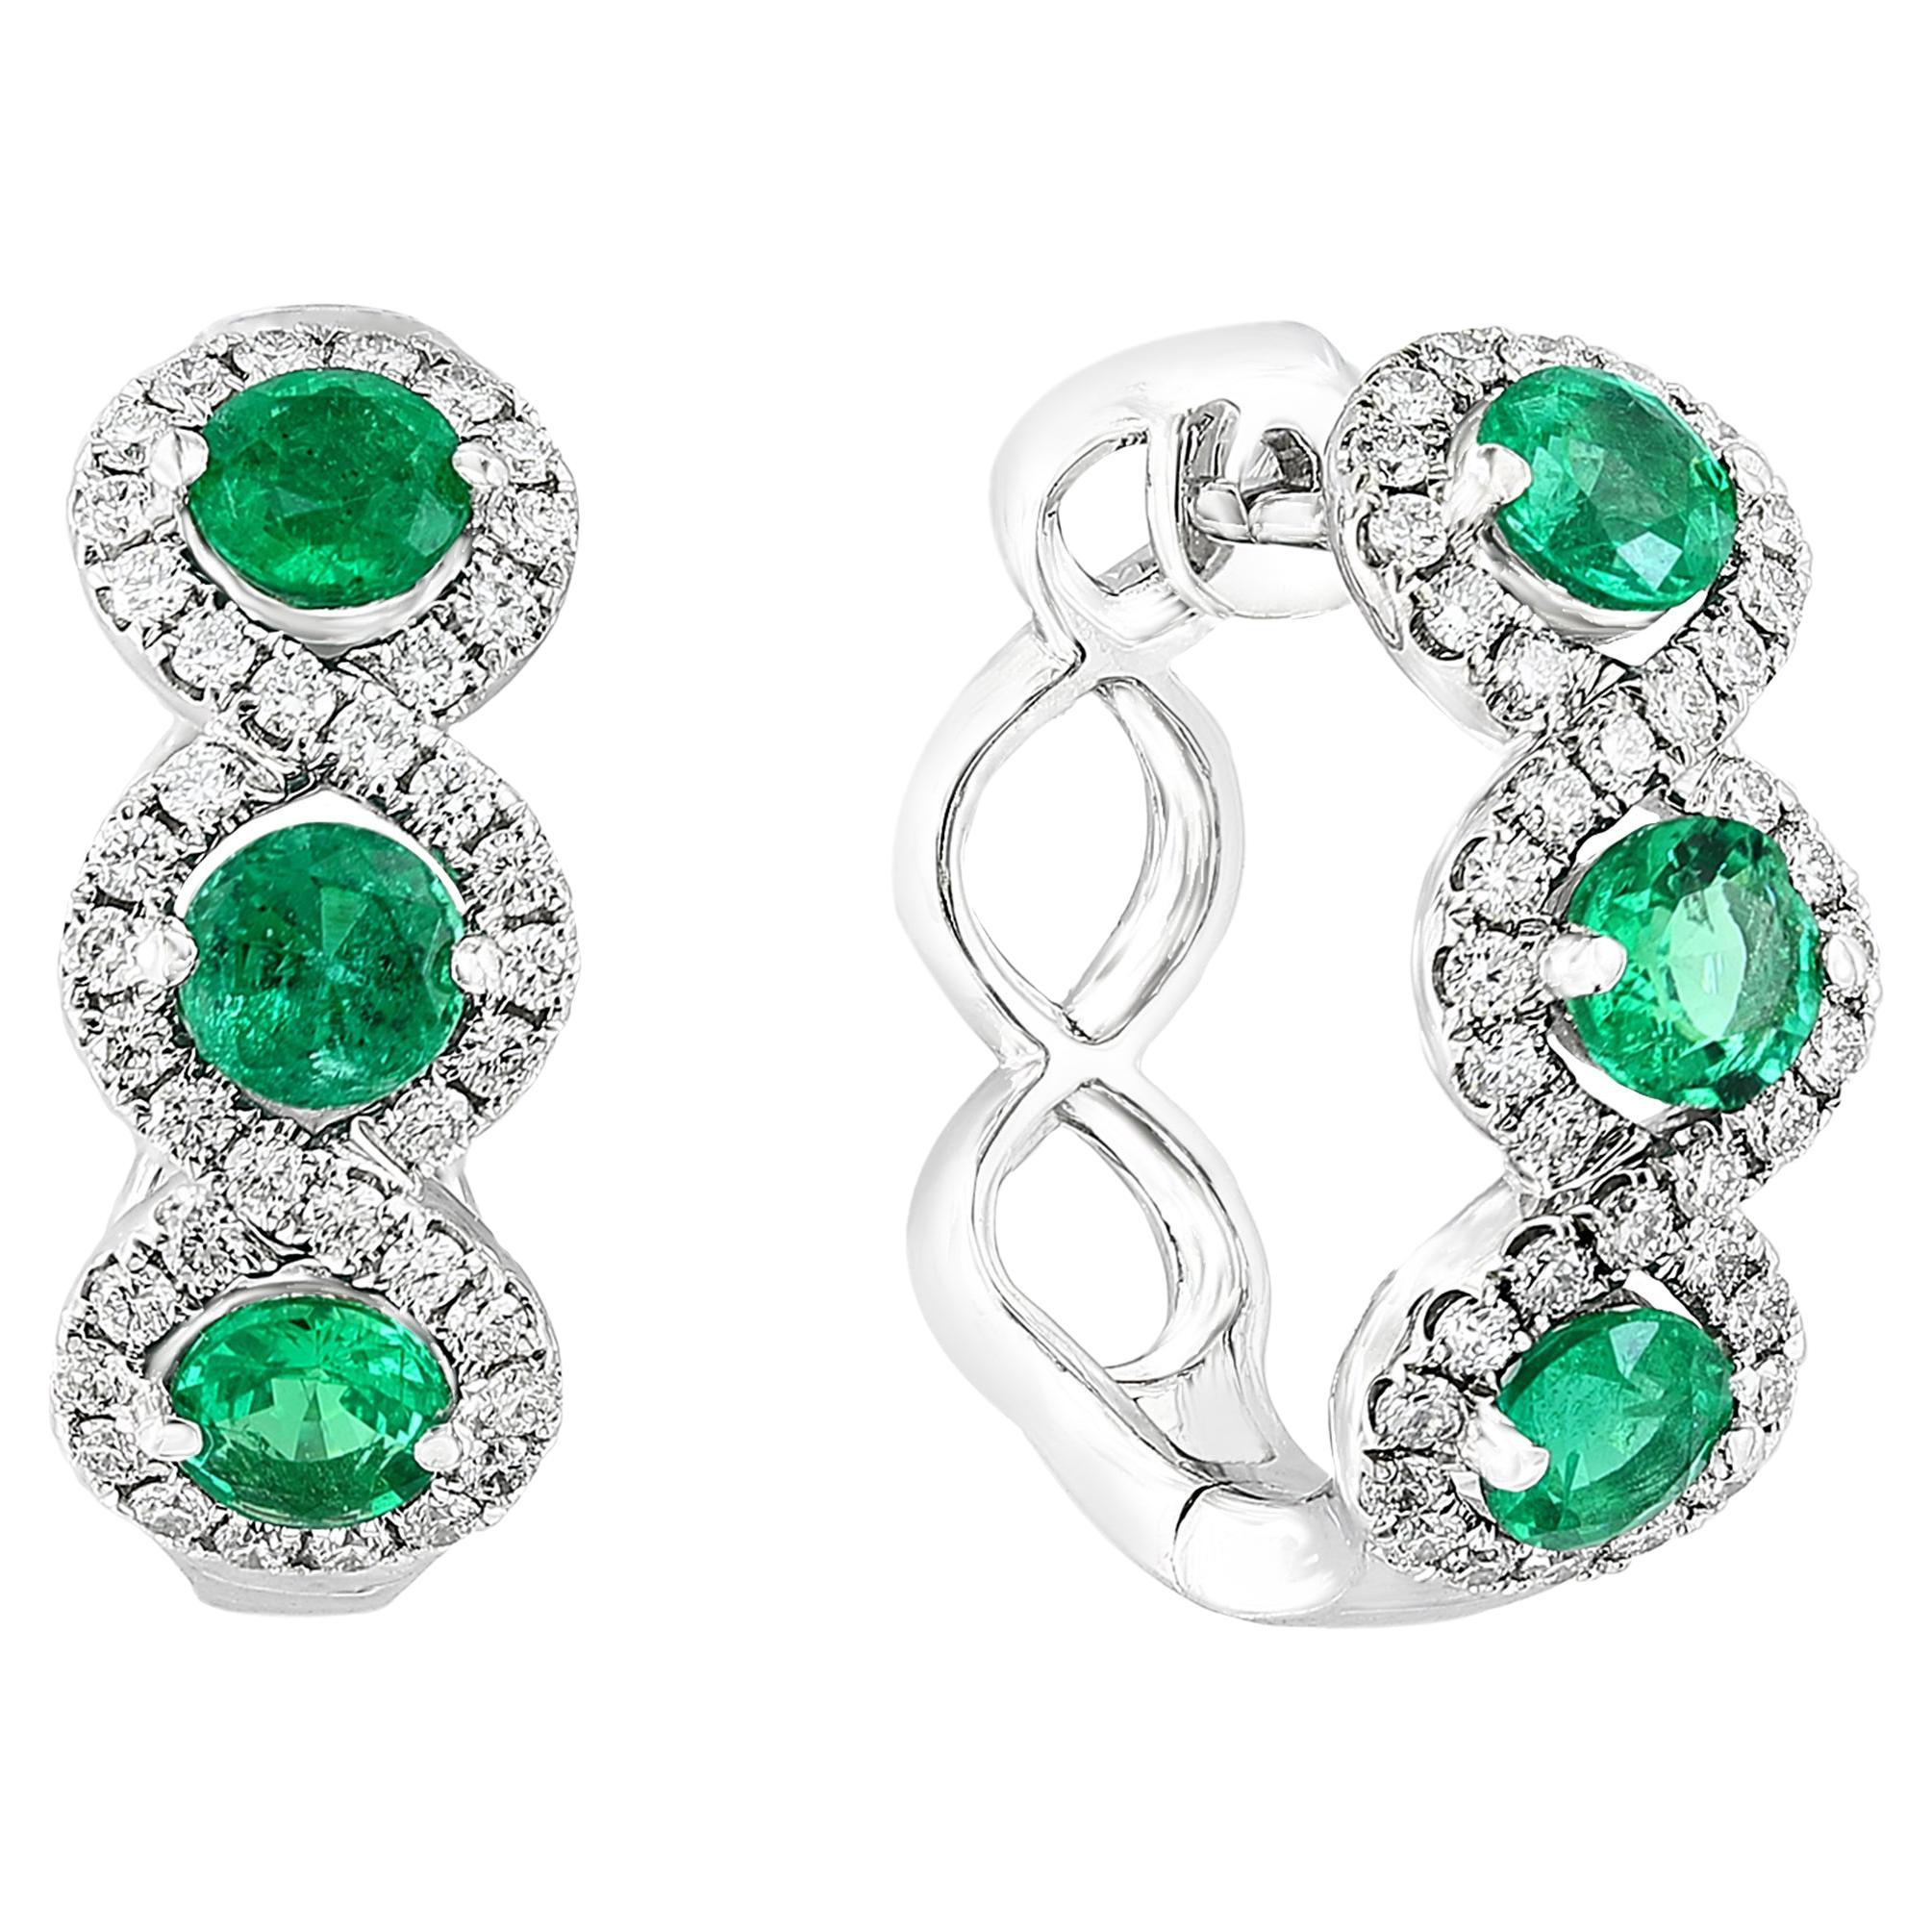 1.72 Carat Round Cut Emerald and Diamond Hoop Earrings in 18K White Gold For Sale